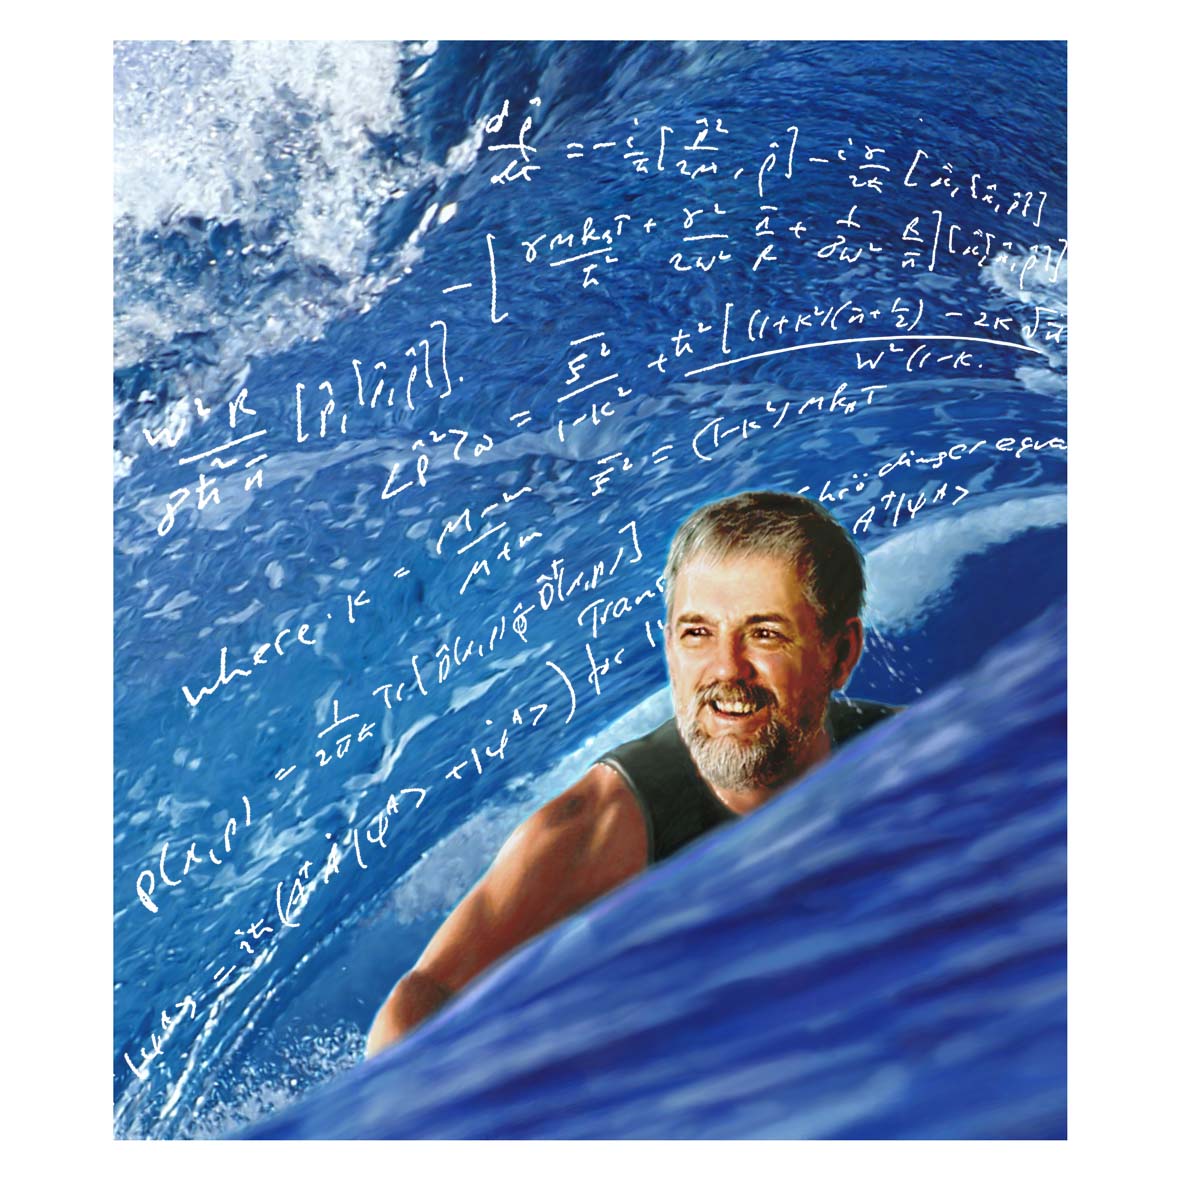 Portrait of Jim Cresser surfing in a sea of equations